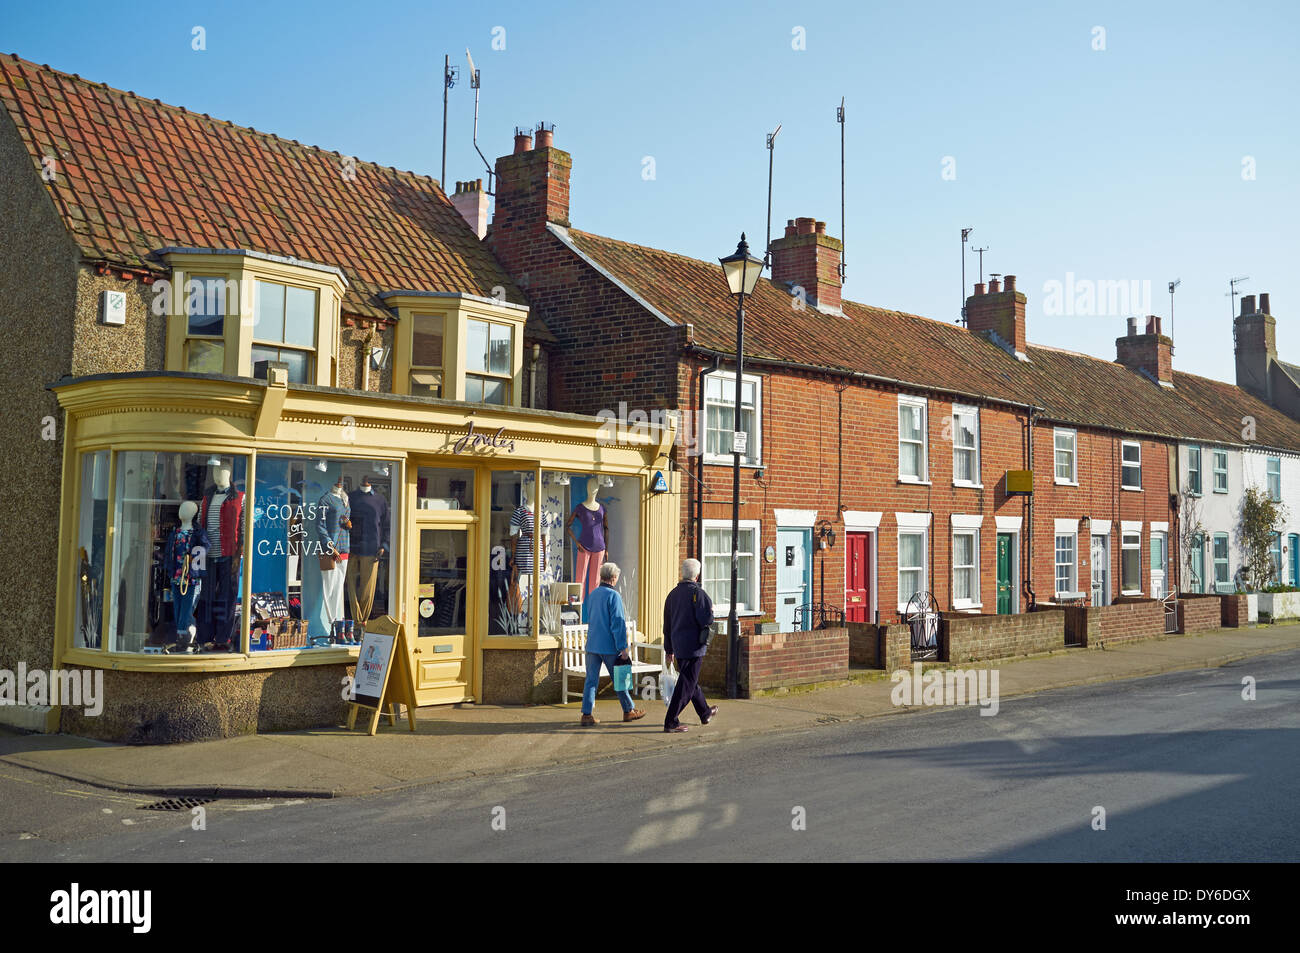 Joules clothes shop, Aldeburgh, Suffolk, UK. Stock Photo